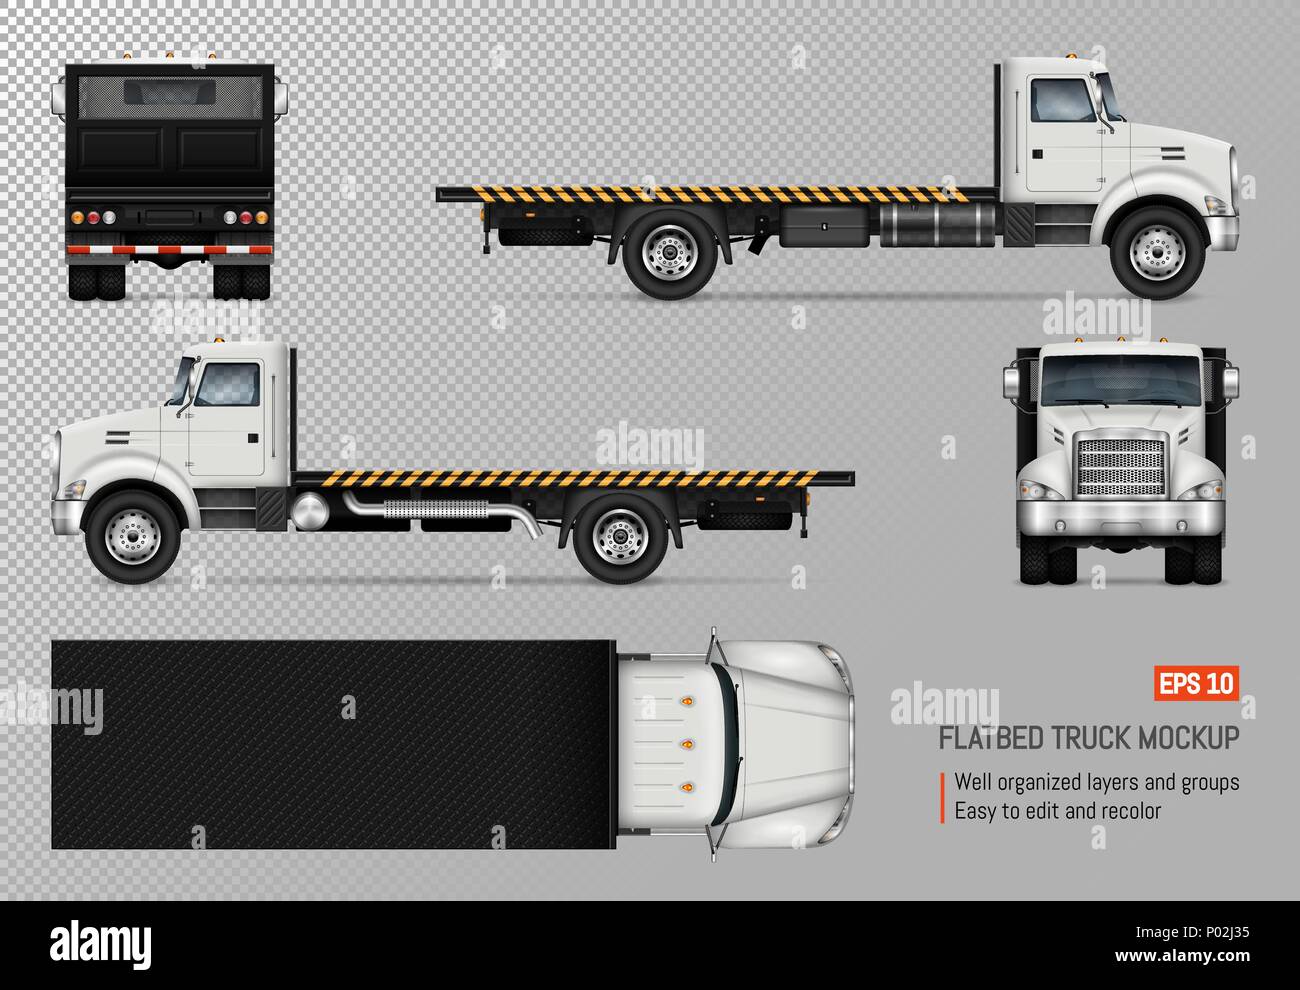 Flatbed truck vector mockup. Isolated template of the white lorry on transparent background for vehicle branding, corporate identity. Stock Vector